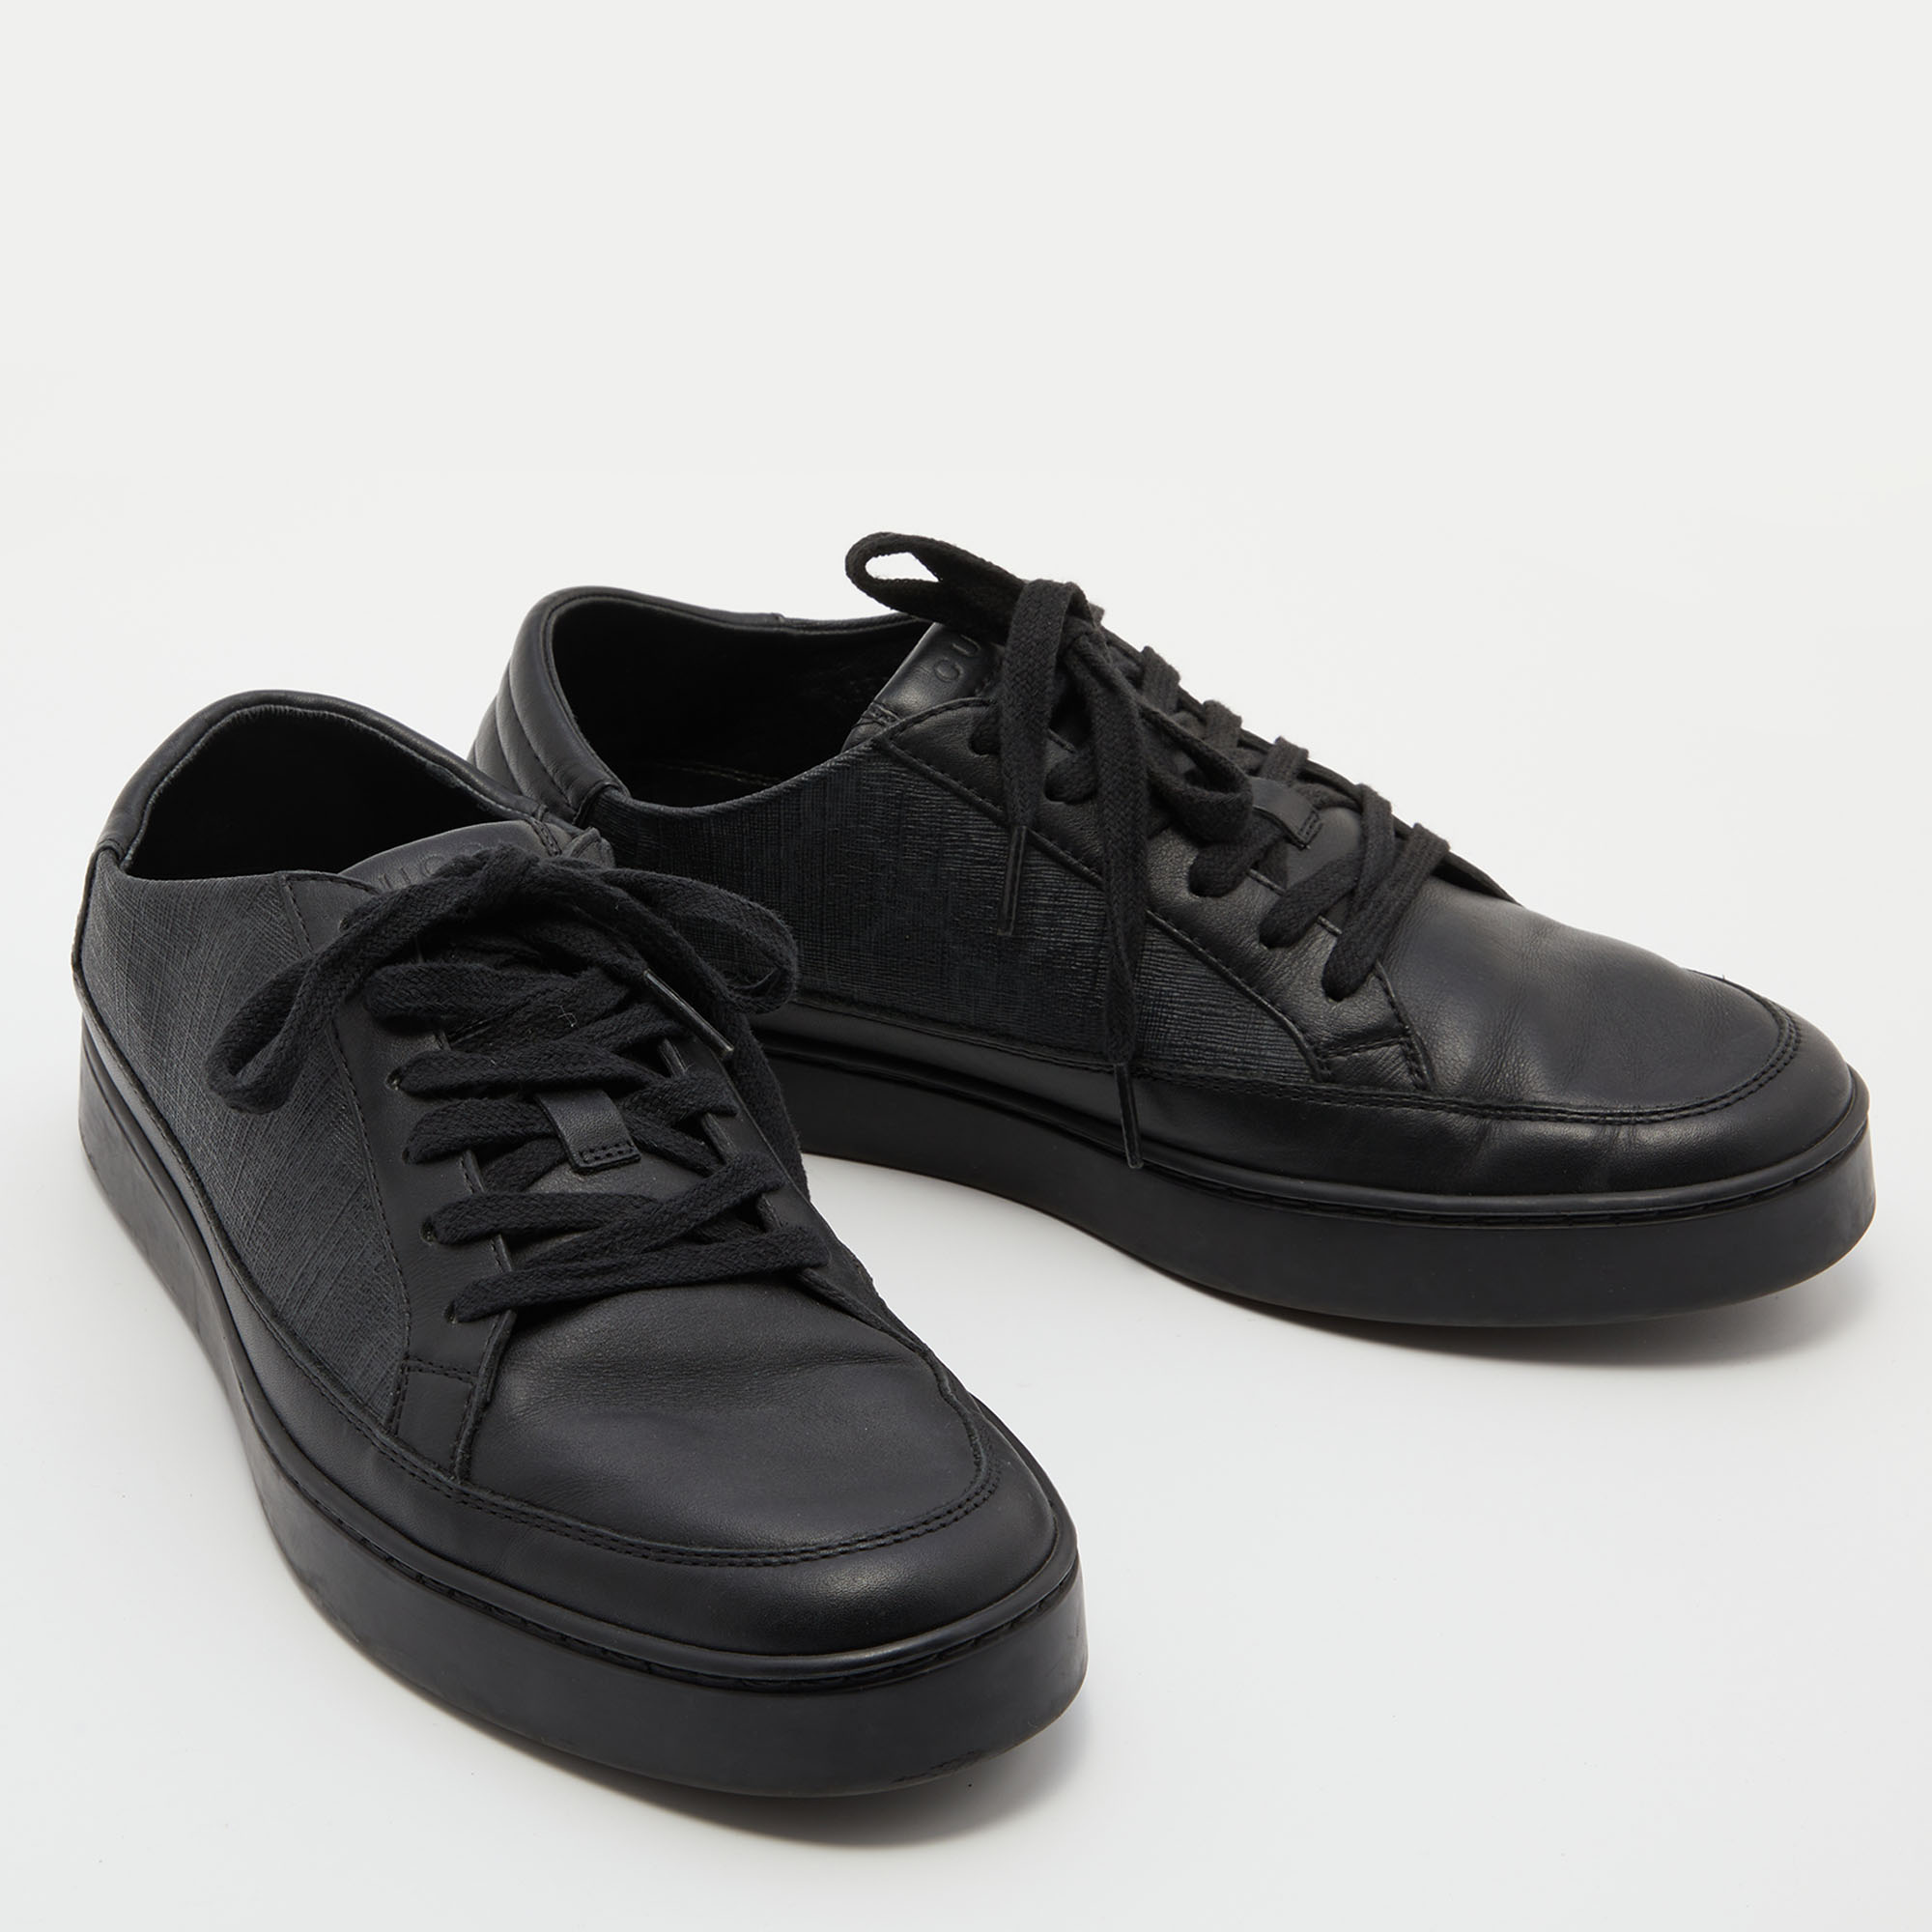 Gucci Black GG Supreme Canvas And Leather Low Top Sneakers Size 42